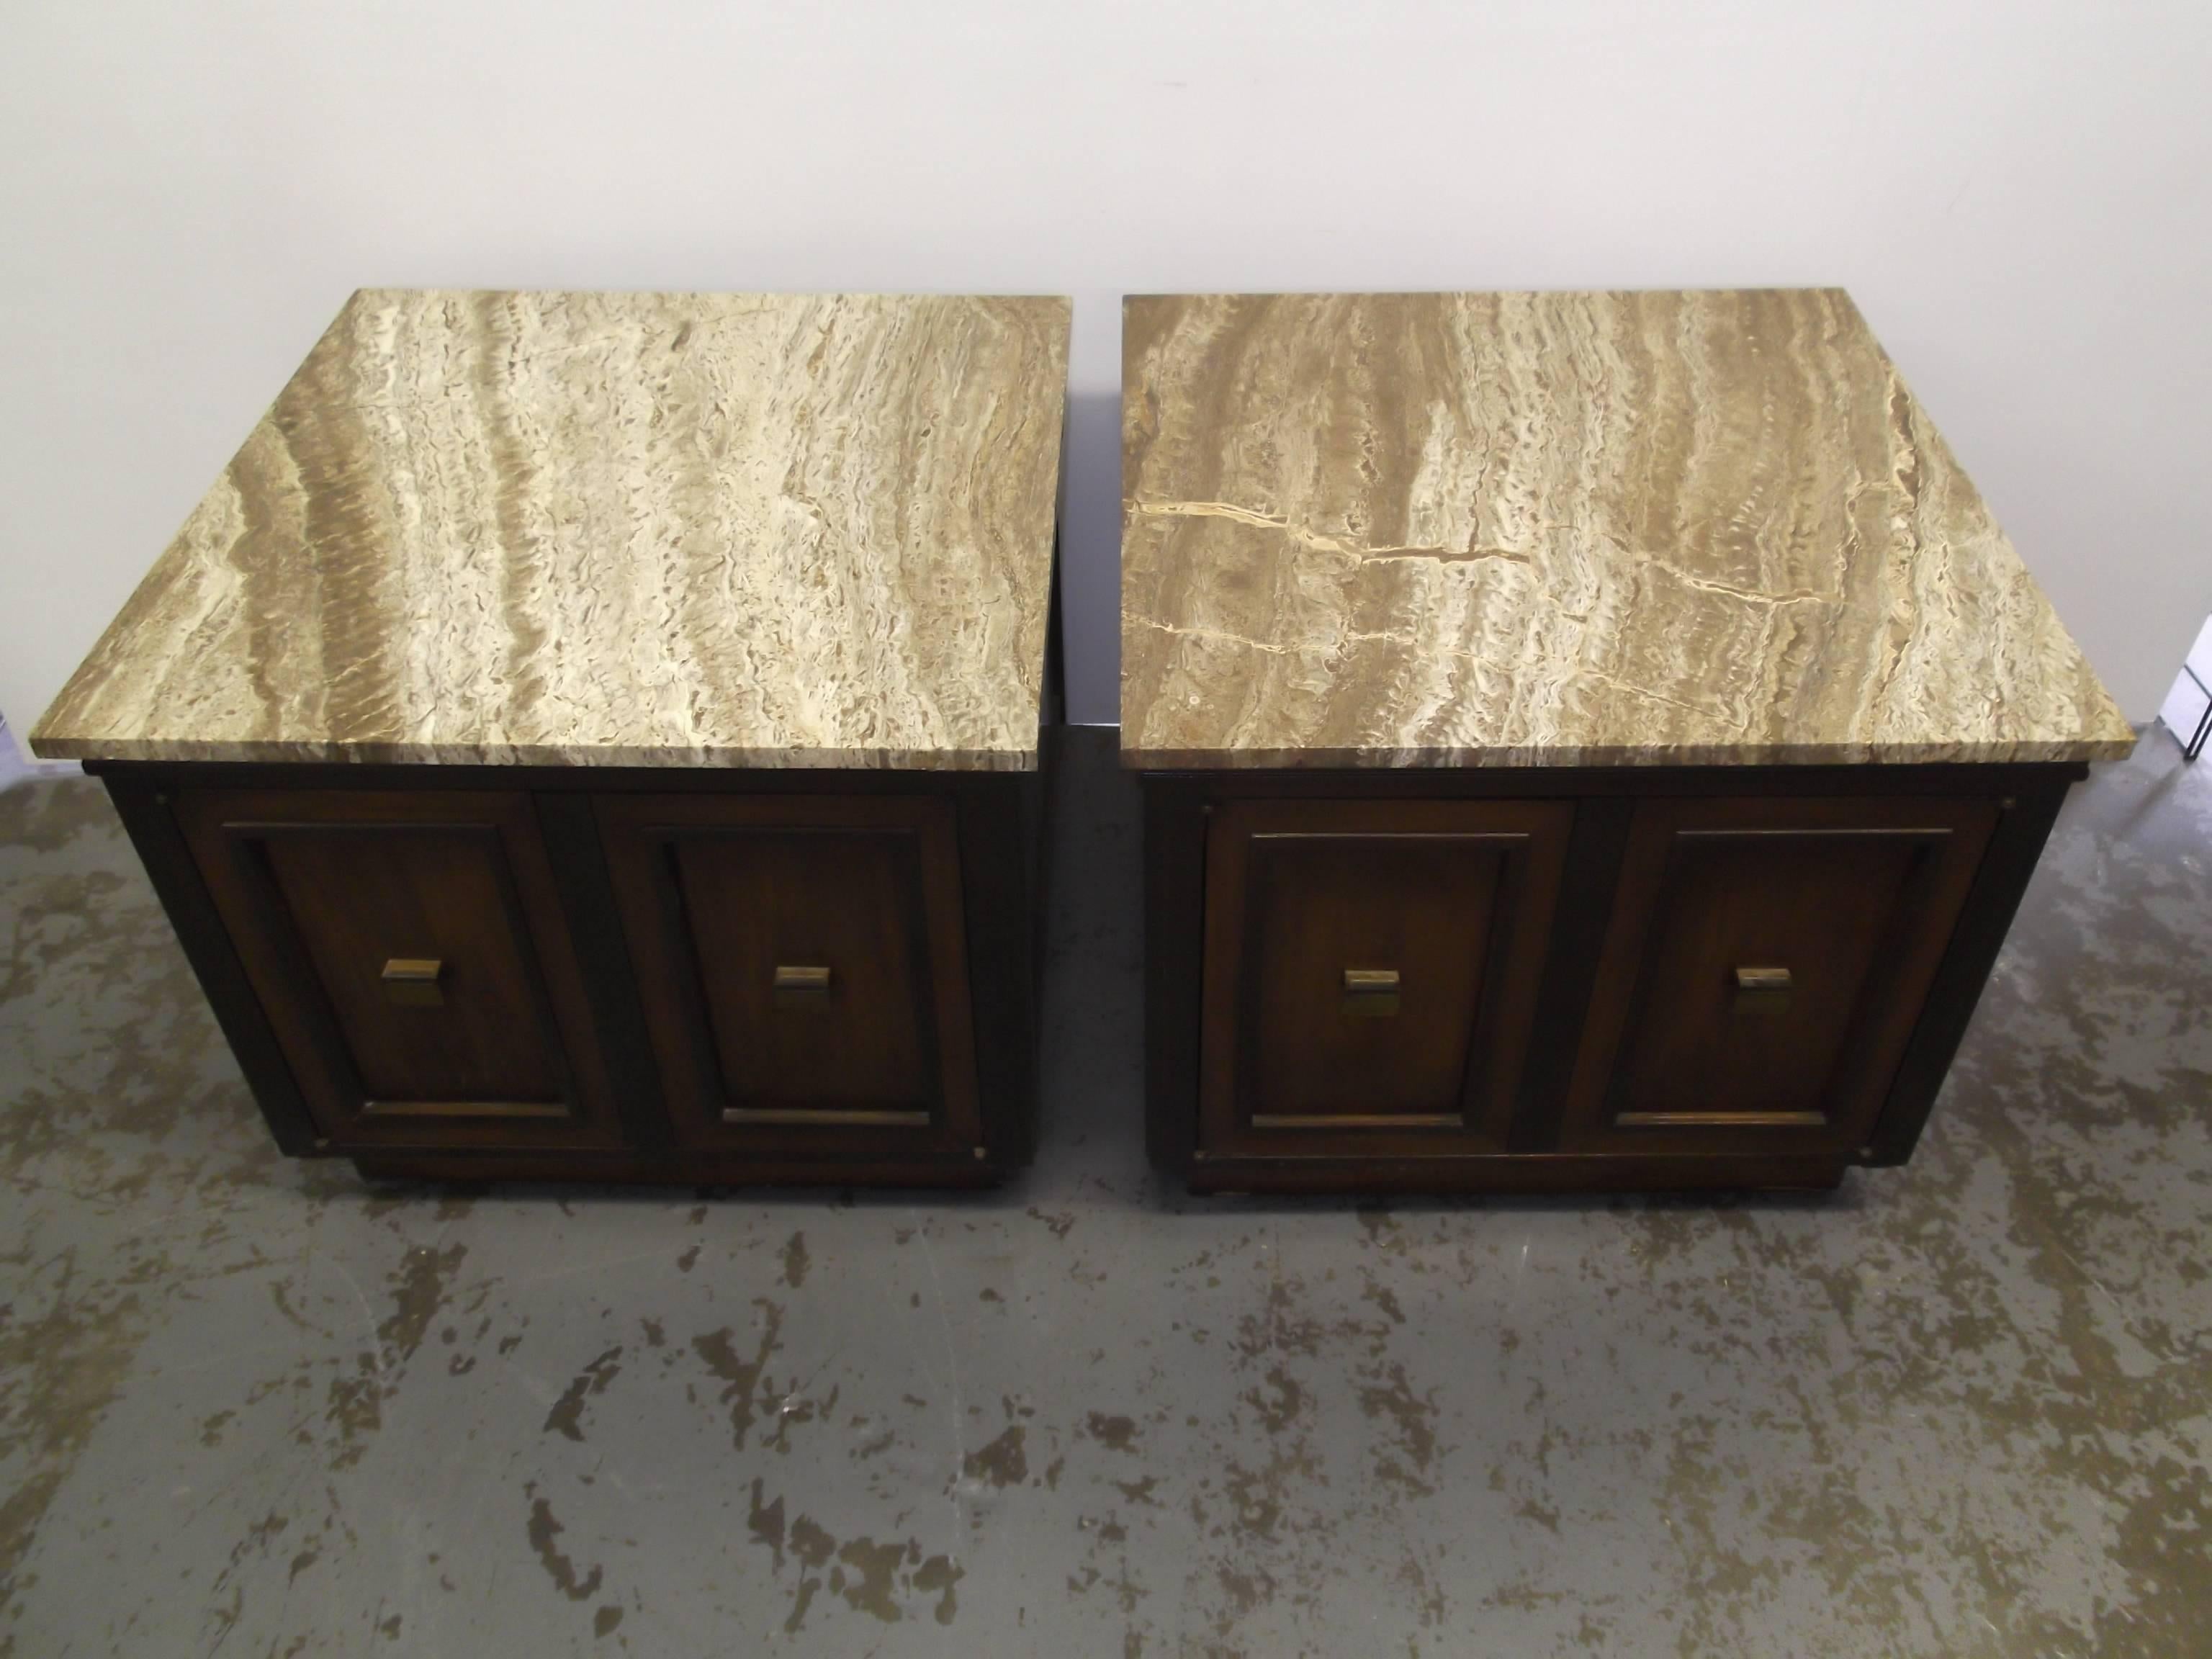 This is a beautiful pair of large low end tables, in the manner of Harvey Probber. They feature doors to the front with a shelf inside. They have contrasting dark, and lighter finishes. There are brass handles. The tops are figural Travertine that